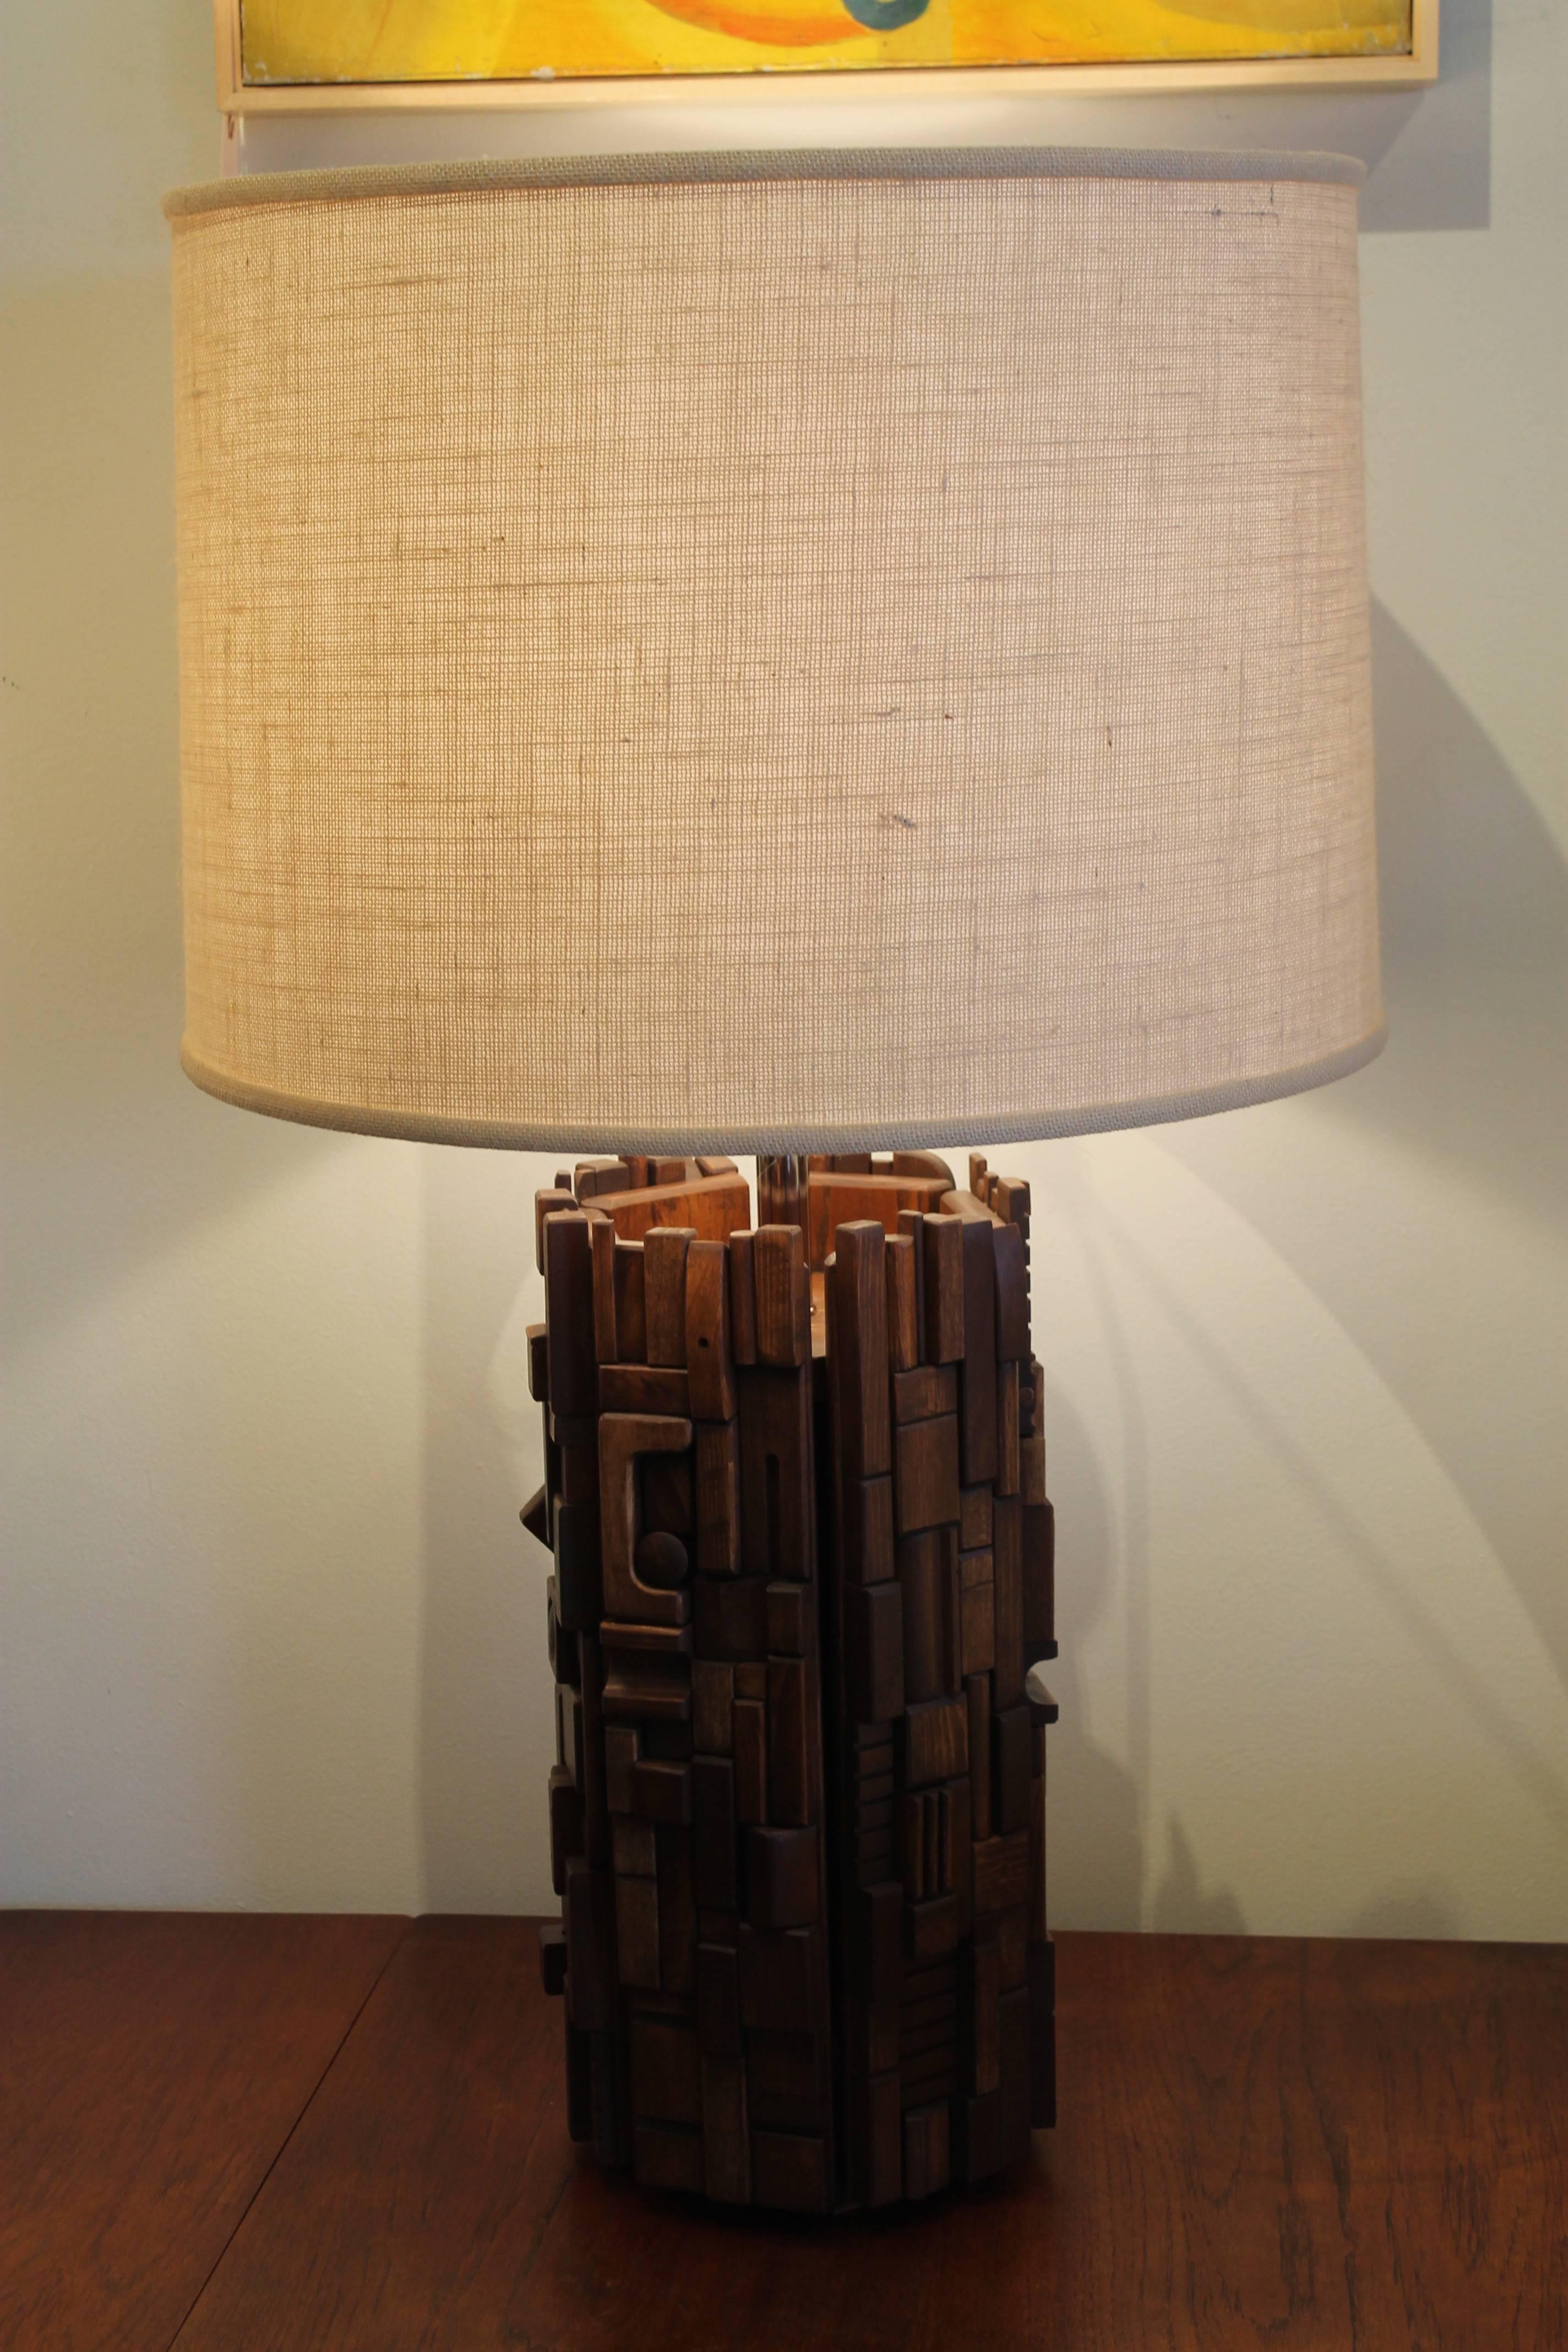 A monumental table lamp consisting of six rectangular panels each covered in hand cut and carved hardwood pieces. Each panel is different. Unsigned but clearly the work of Mabel Hutchinson circa 1960s. Overall height is 37